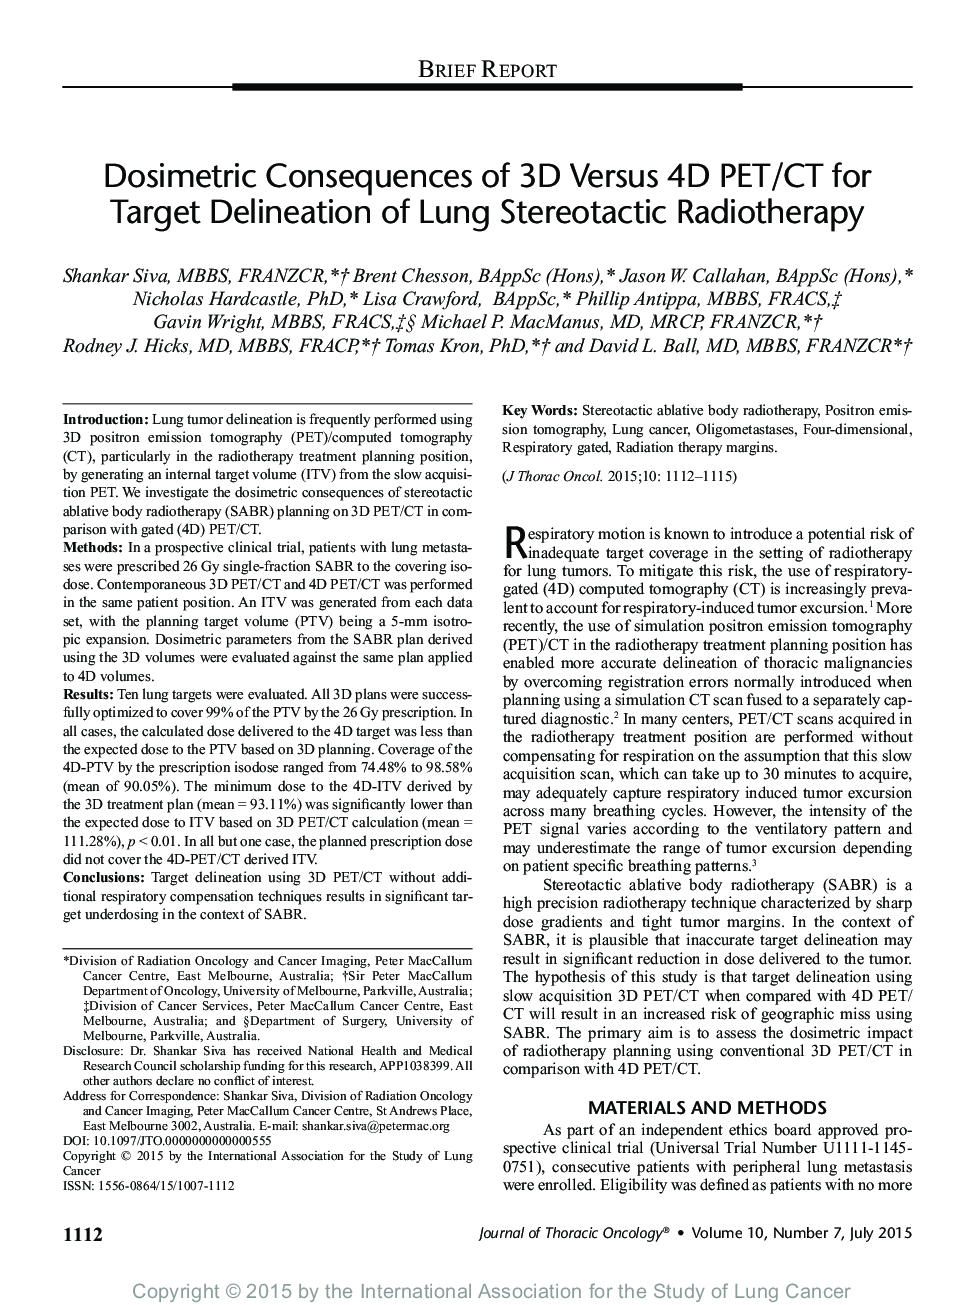 Dosimetric Consequences of 3D Versus 4D PET/CT for Target Delineation of Lung Stereotactic Radiotherapy